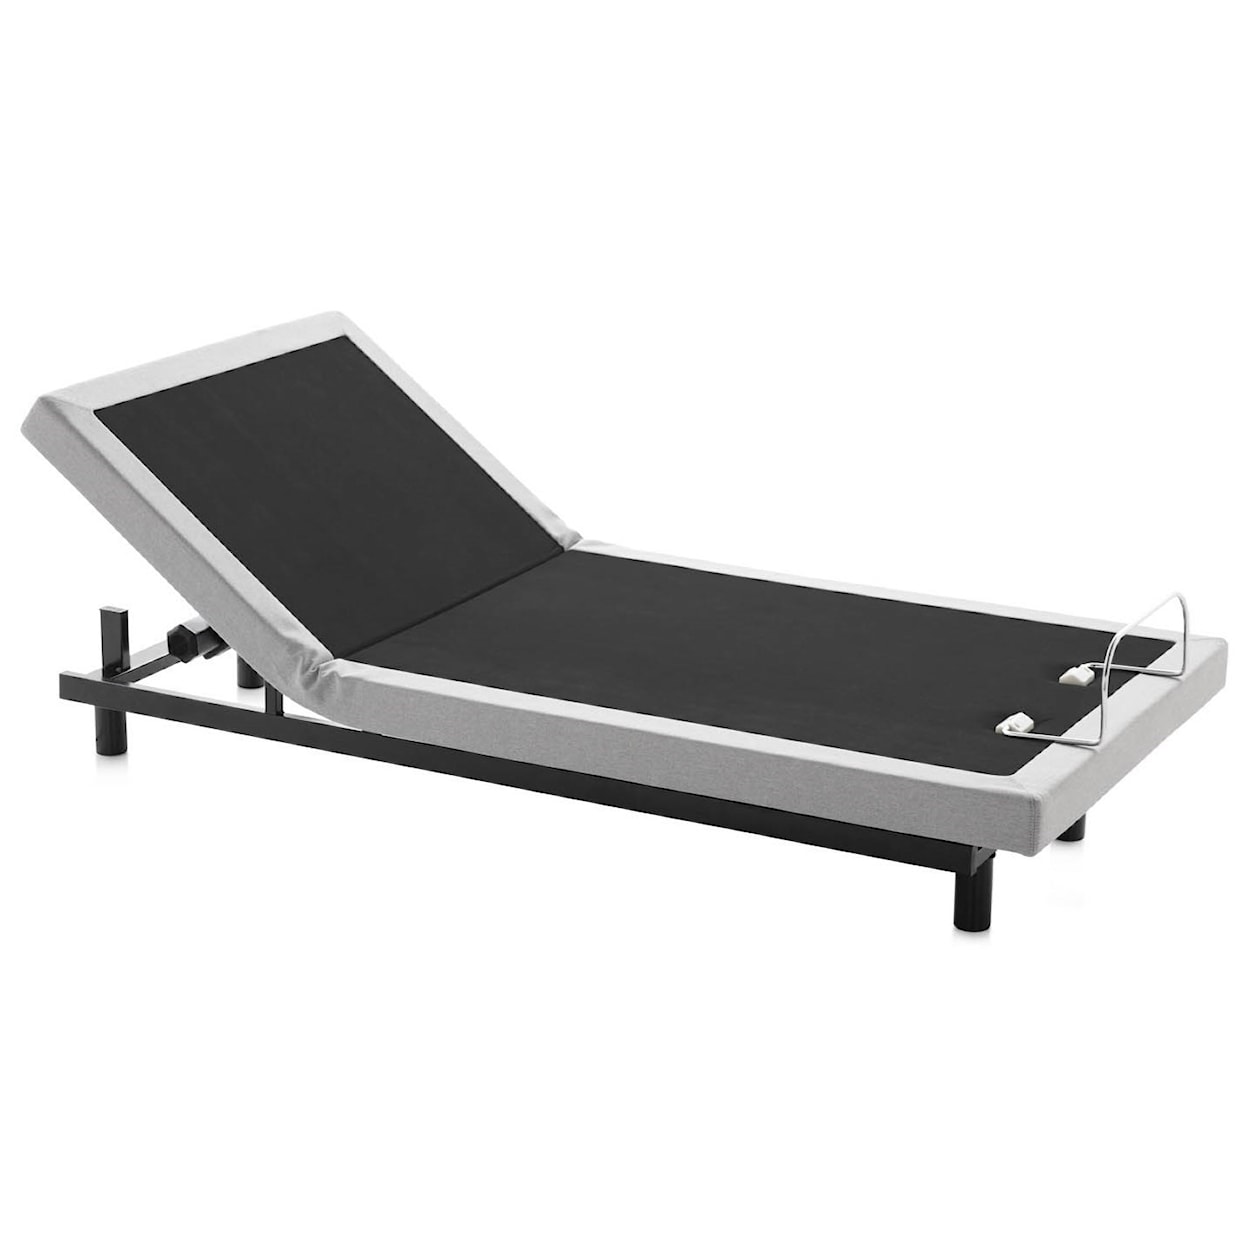 Malouf Structures E200 Adjustable Bed Base Queen E200 Adjustable Bed Base 